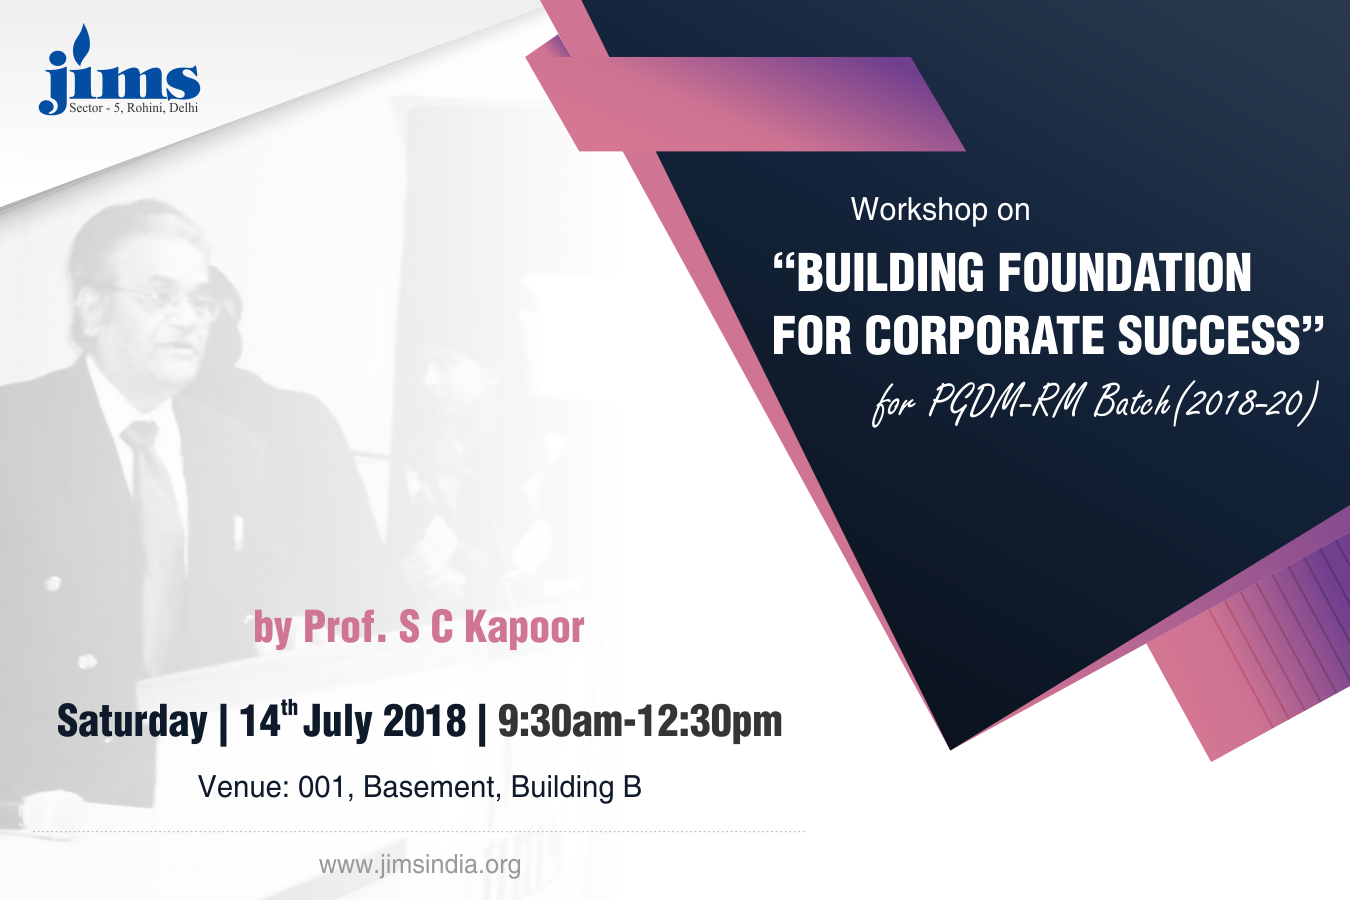 JIMSRohini is organizing Workshop on Building foundation for corporate success on 14th July 2018 at 9:30am to 12:30pm @ JIMS Rohini